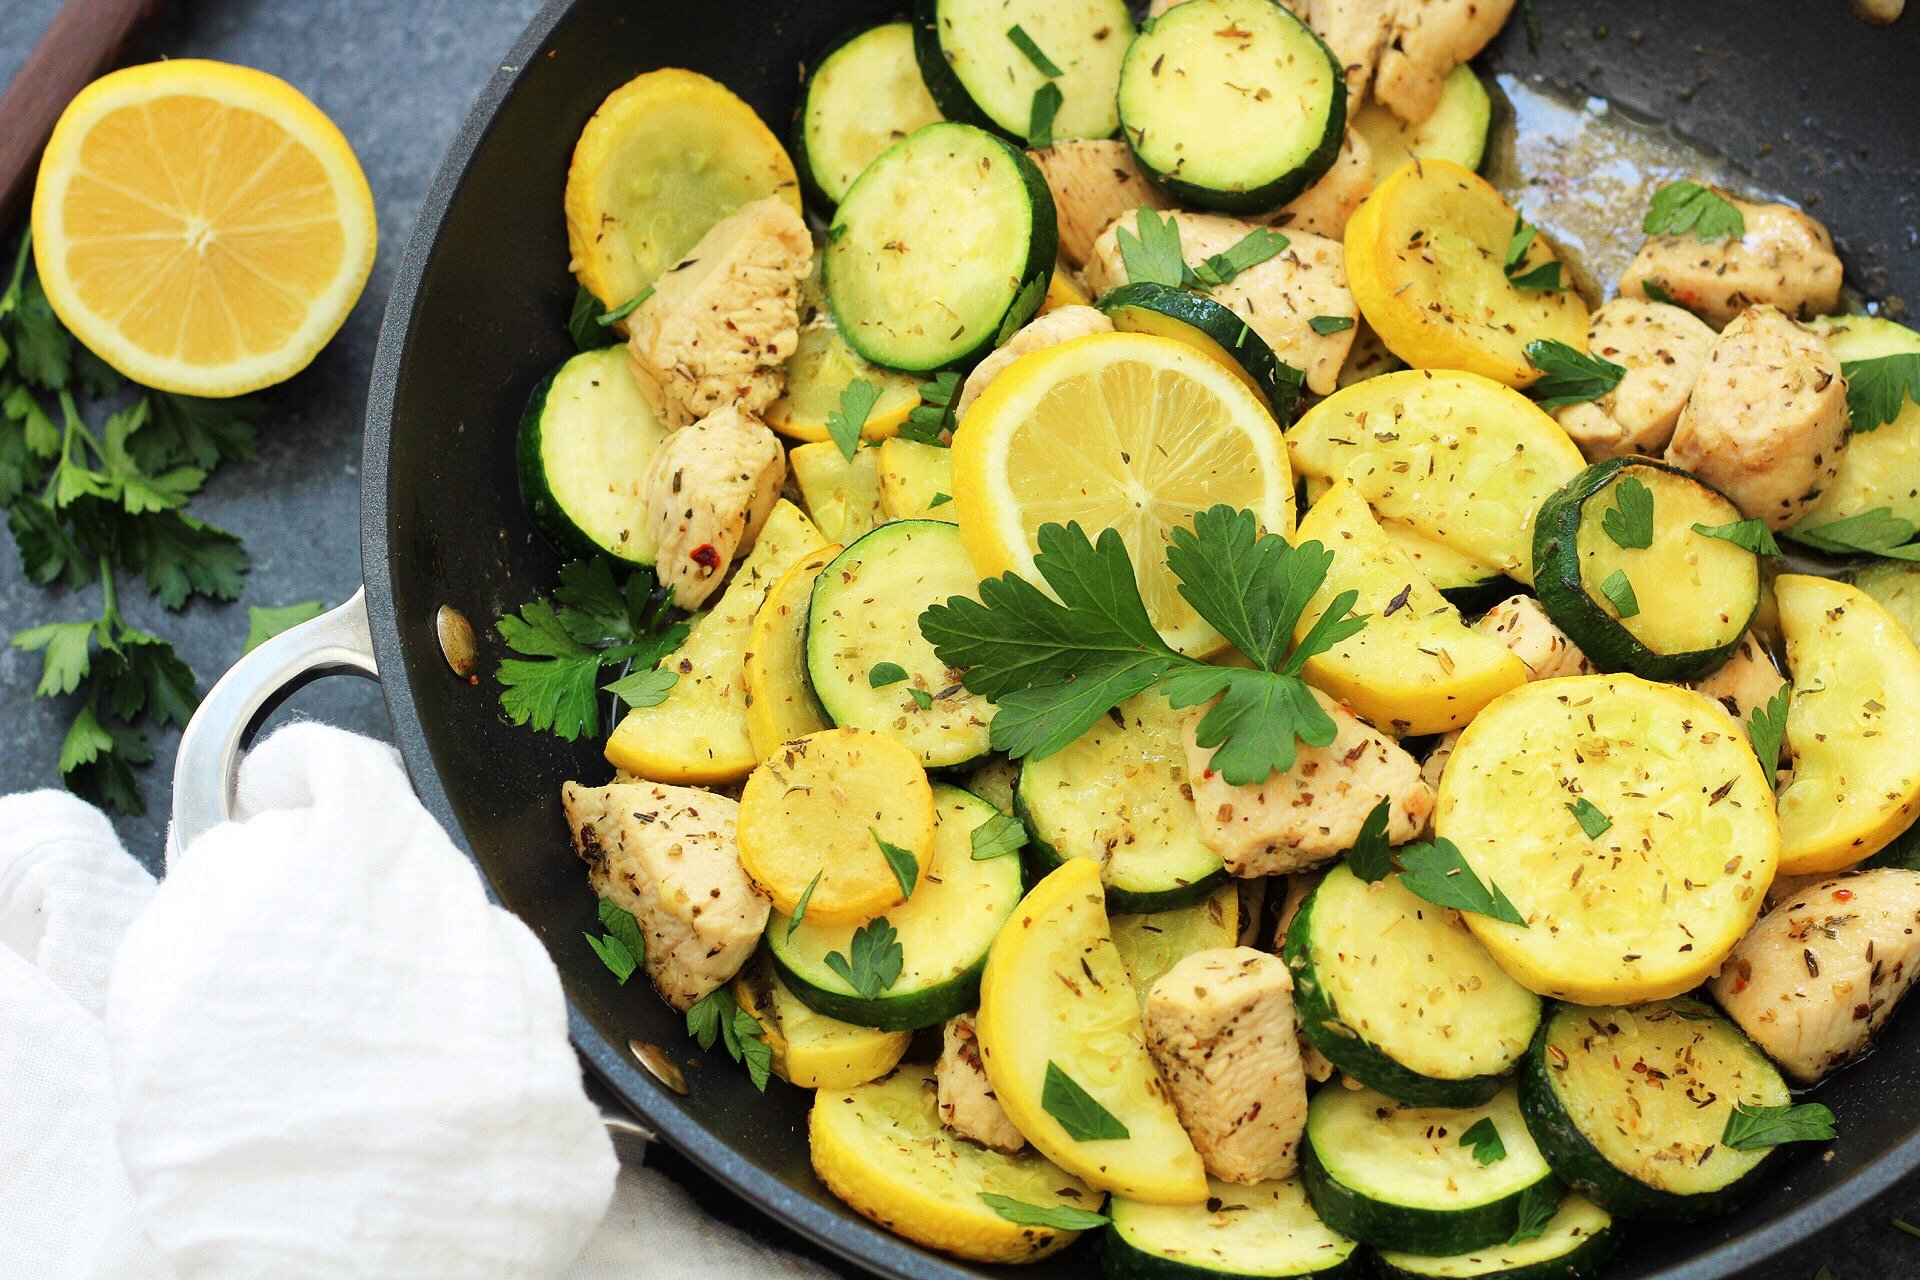 This Whole30 lemon chicken and squash skillet is Paleo, under 30 minutes, low carb and only made in one pot. This is a perfect summer dish for meal prep, or for a family friendly weeknight meal you won't have to heat up your kitchen for. #whole30lemonchicken #whole30onepot #paleochickenrecipes #whole30chickenrecipes